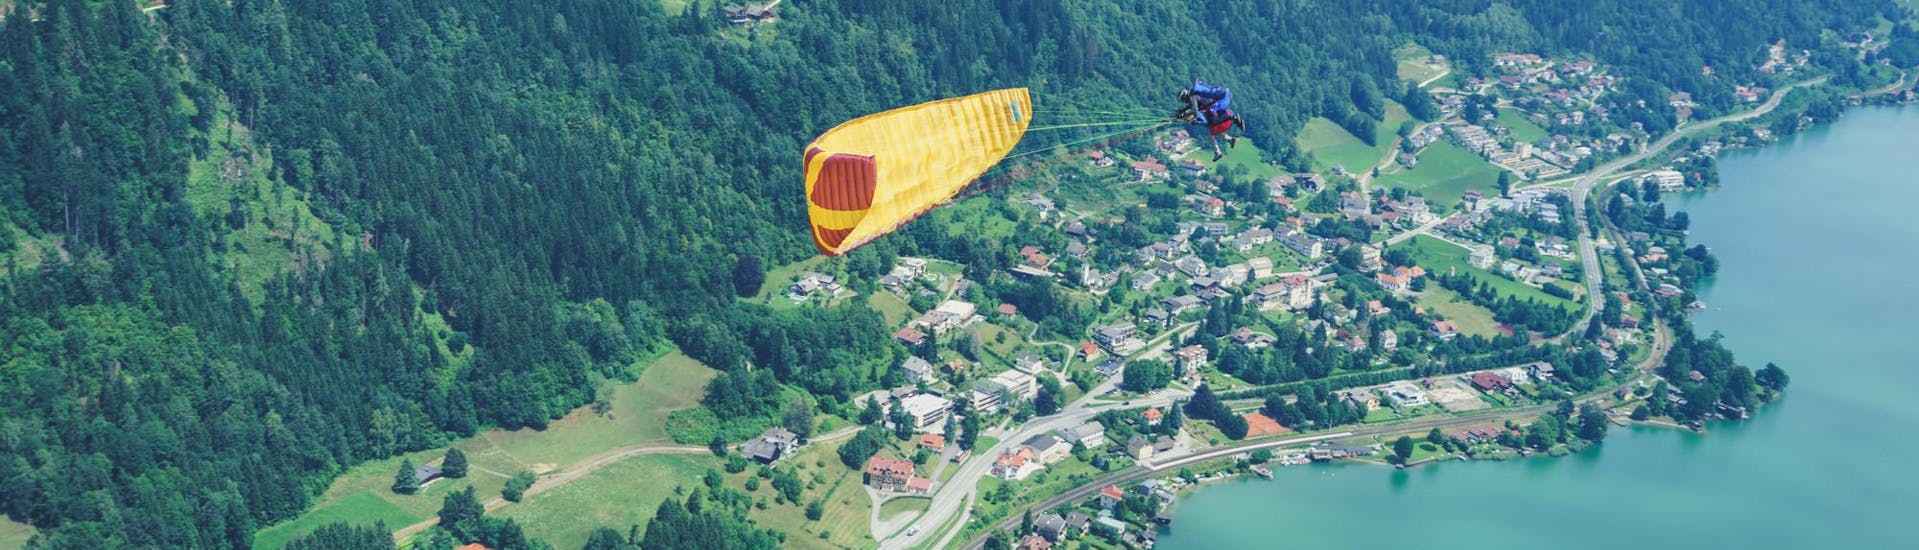 A acrobatic turn during Tandem Paragliding in Carinthia - Adrenaline Flight with Best Place - Flieger Base Villach.